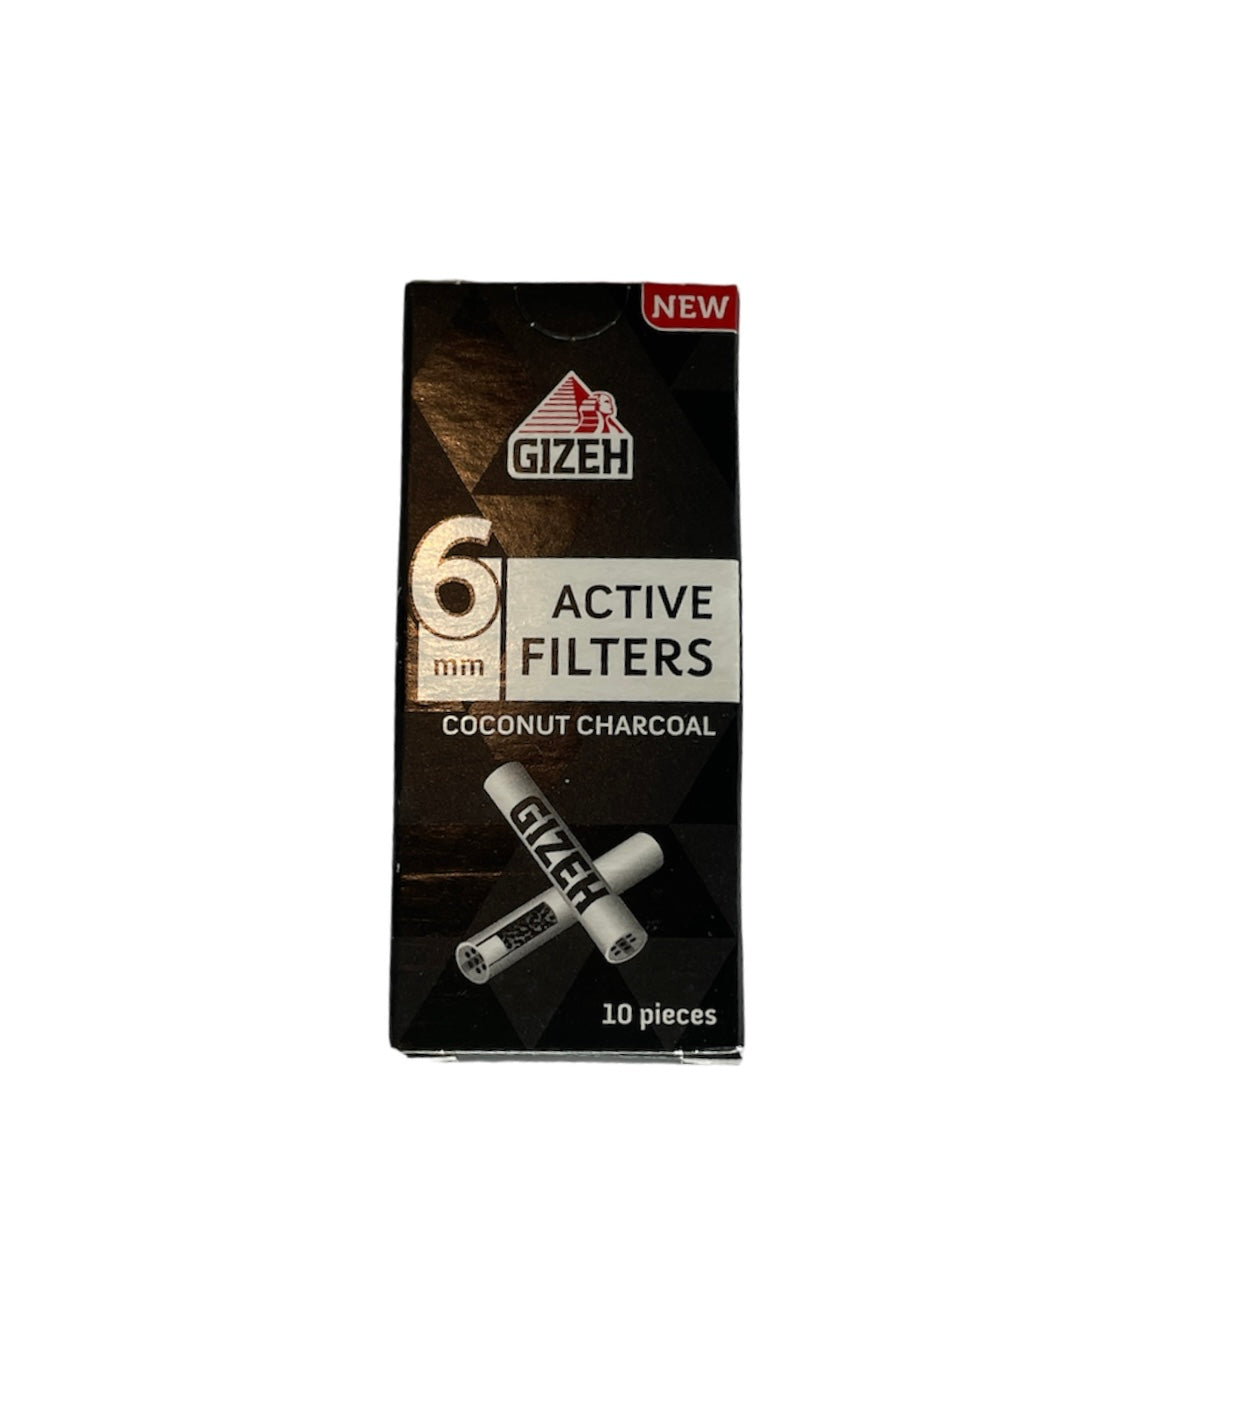 GIZEH Active Coconut Charcoal Filters for Joints